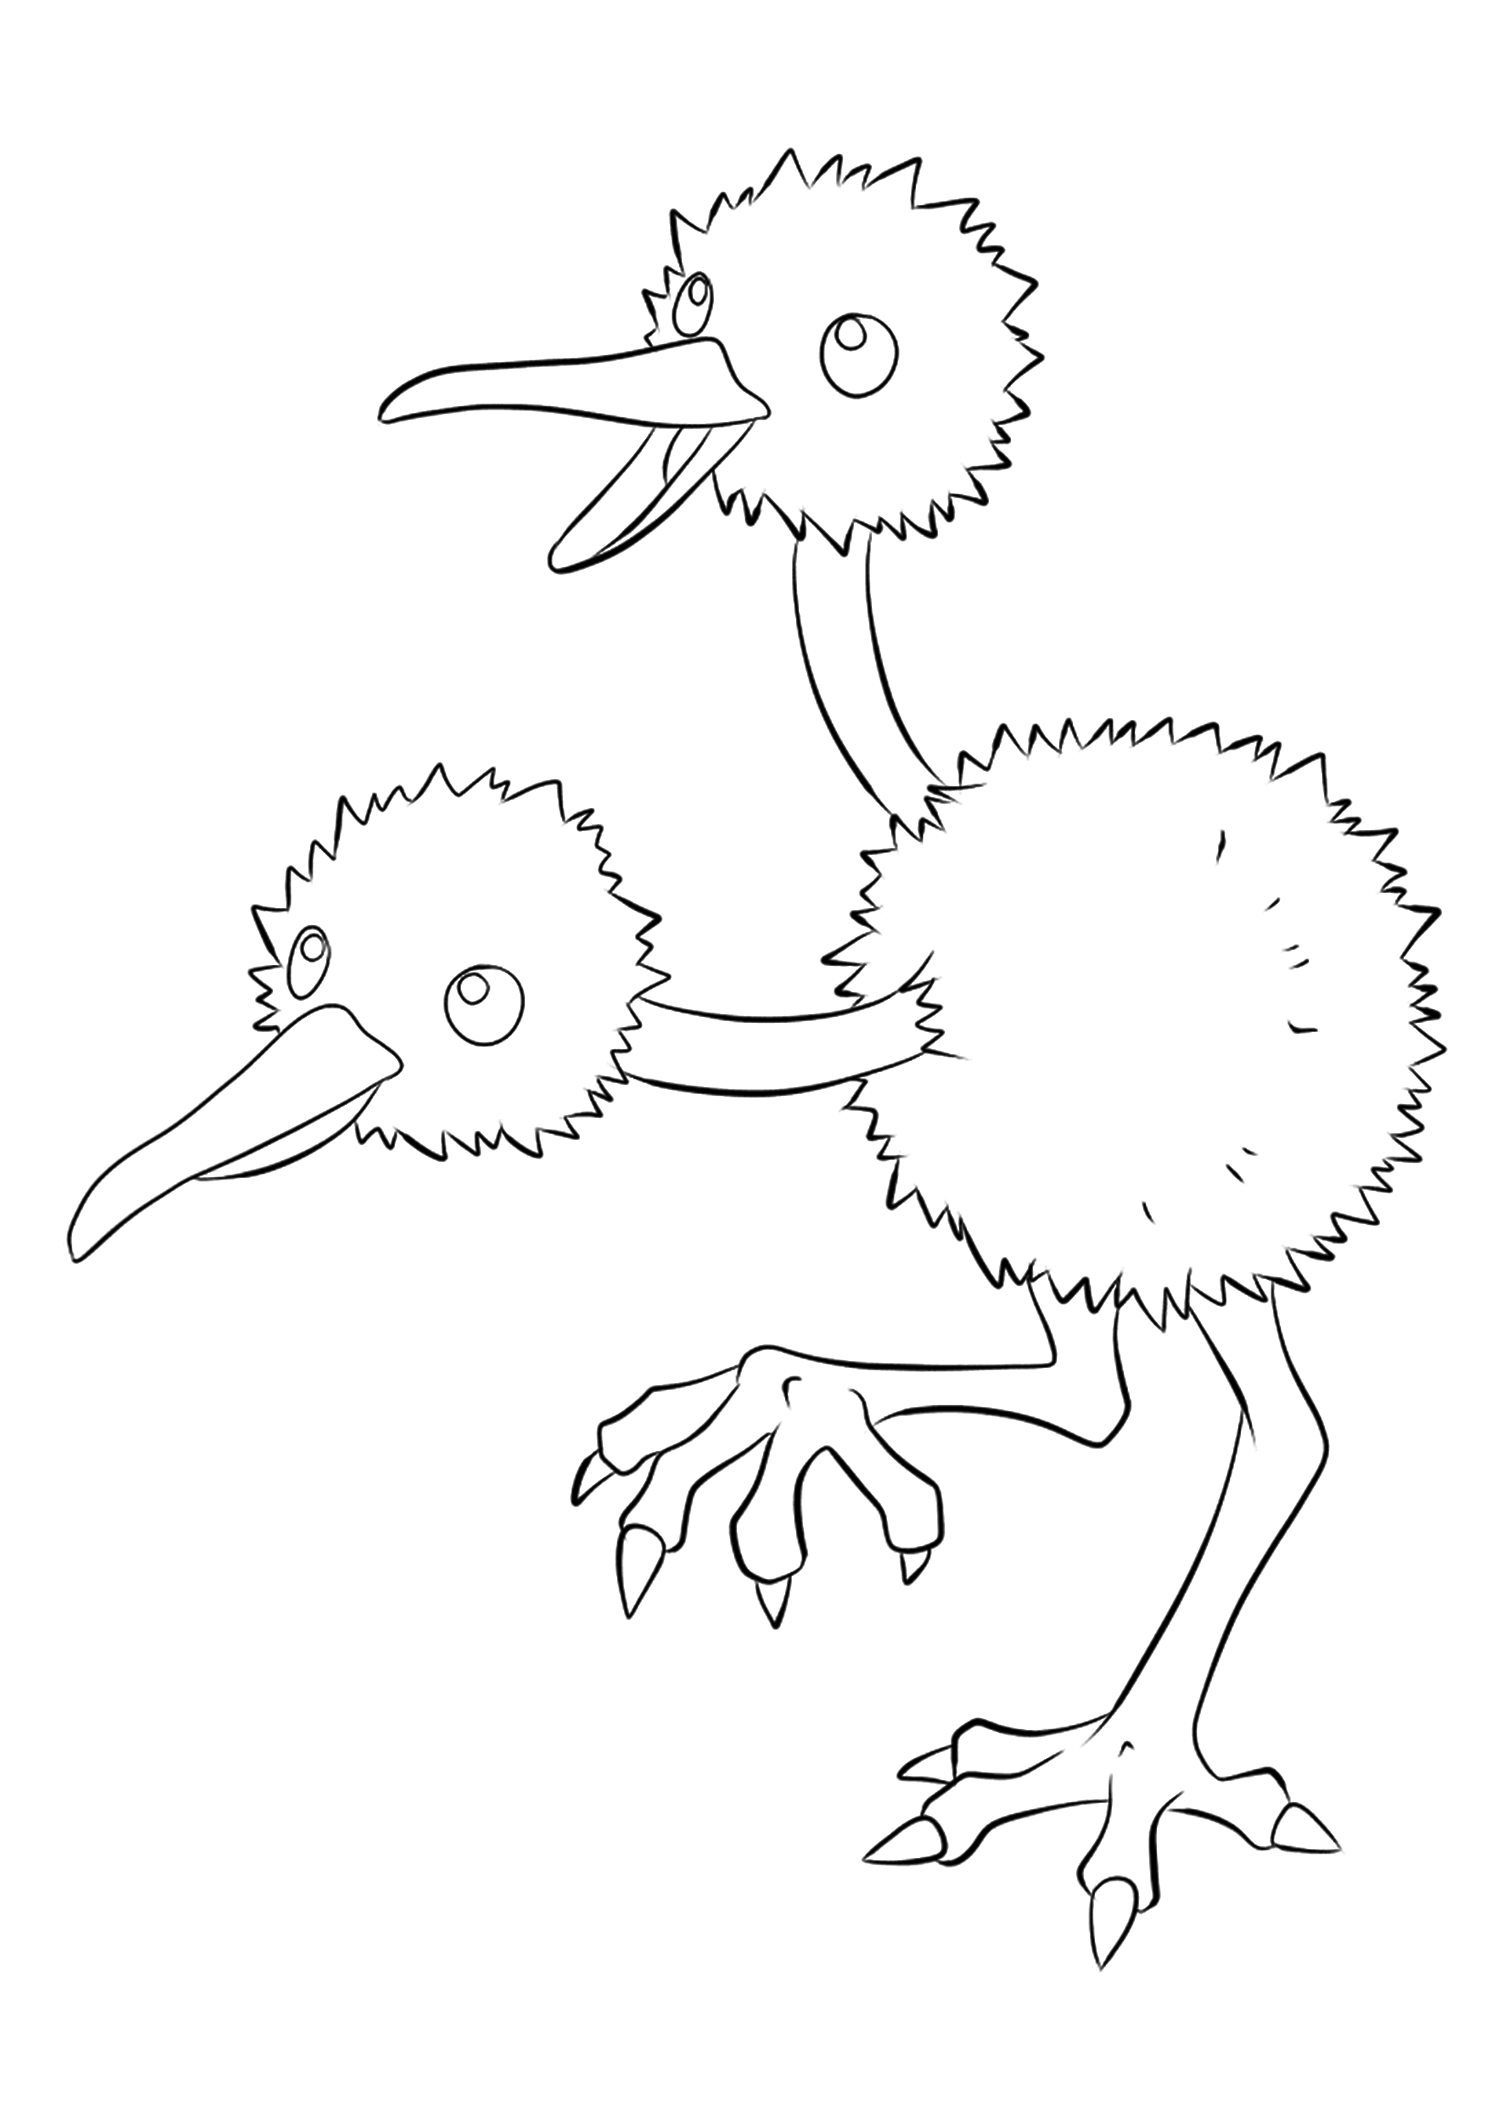 Doduo (No.84). Doduo Coloring page, Generation I Pokemon of type Normal and FlyingOriginal image credit: Pokemon linearts by Lilly Gerbil on Deviantart.Permission:  All rights reserved © Pokemon company and Ken Sugimori.